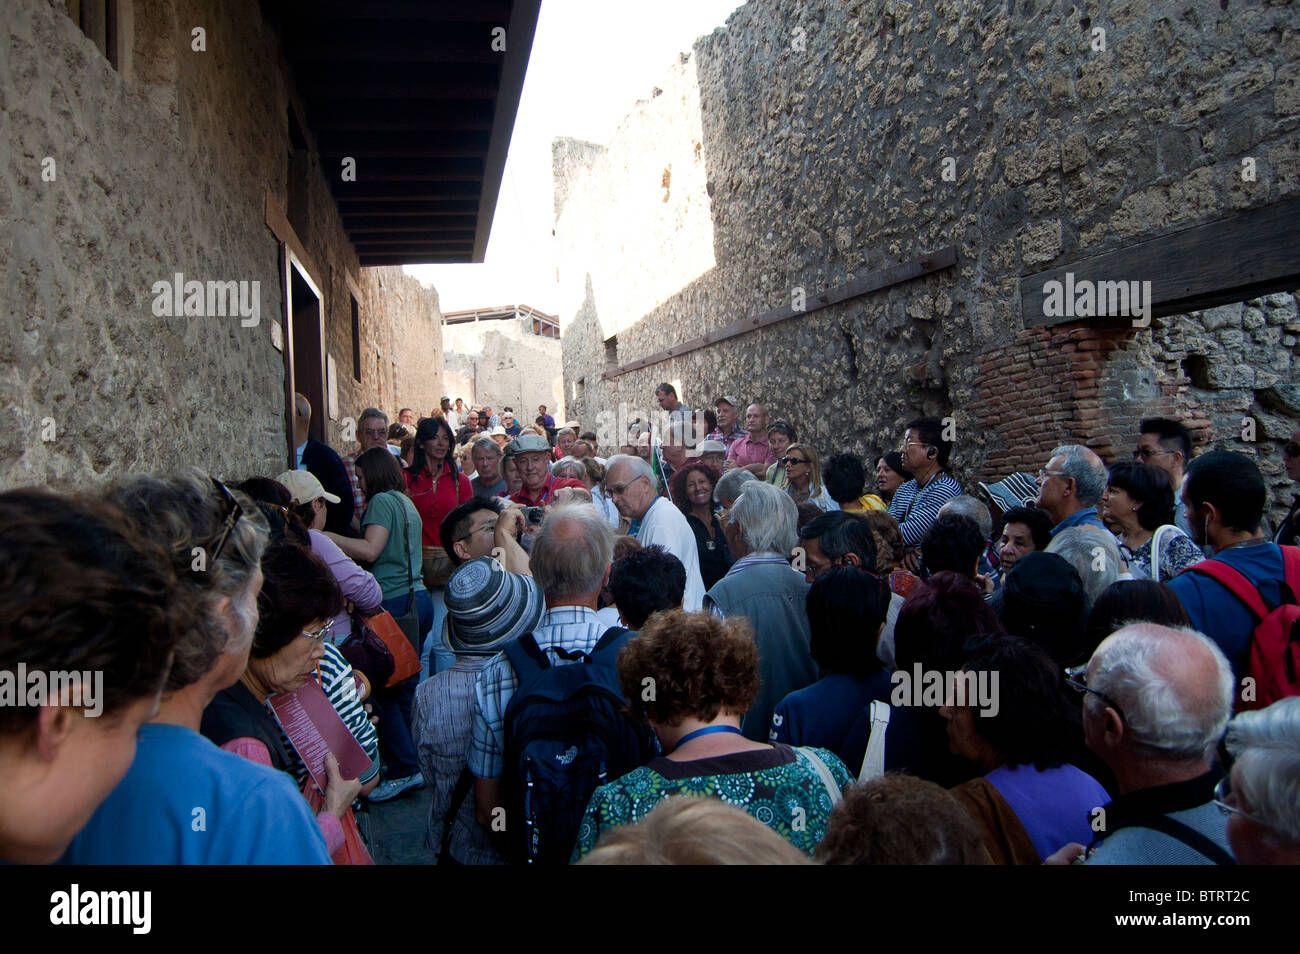 Crowd of visitors at the Lupanar of Pompeii, the most famous brothel in the ruined Roman city of Pompeii. Stock Photo